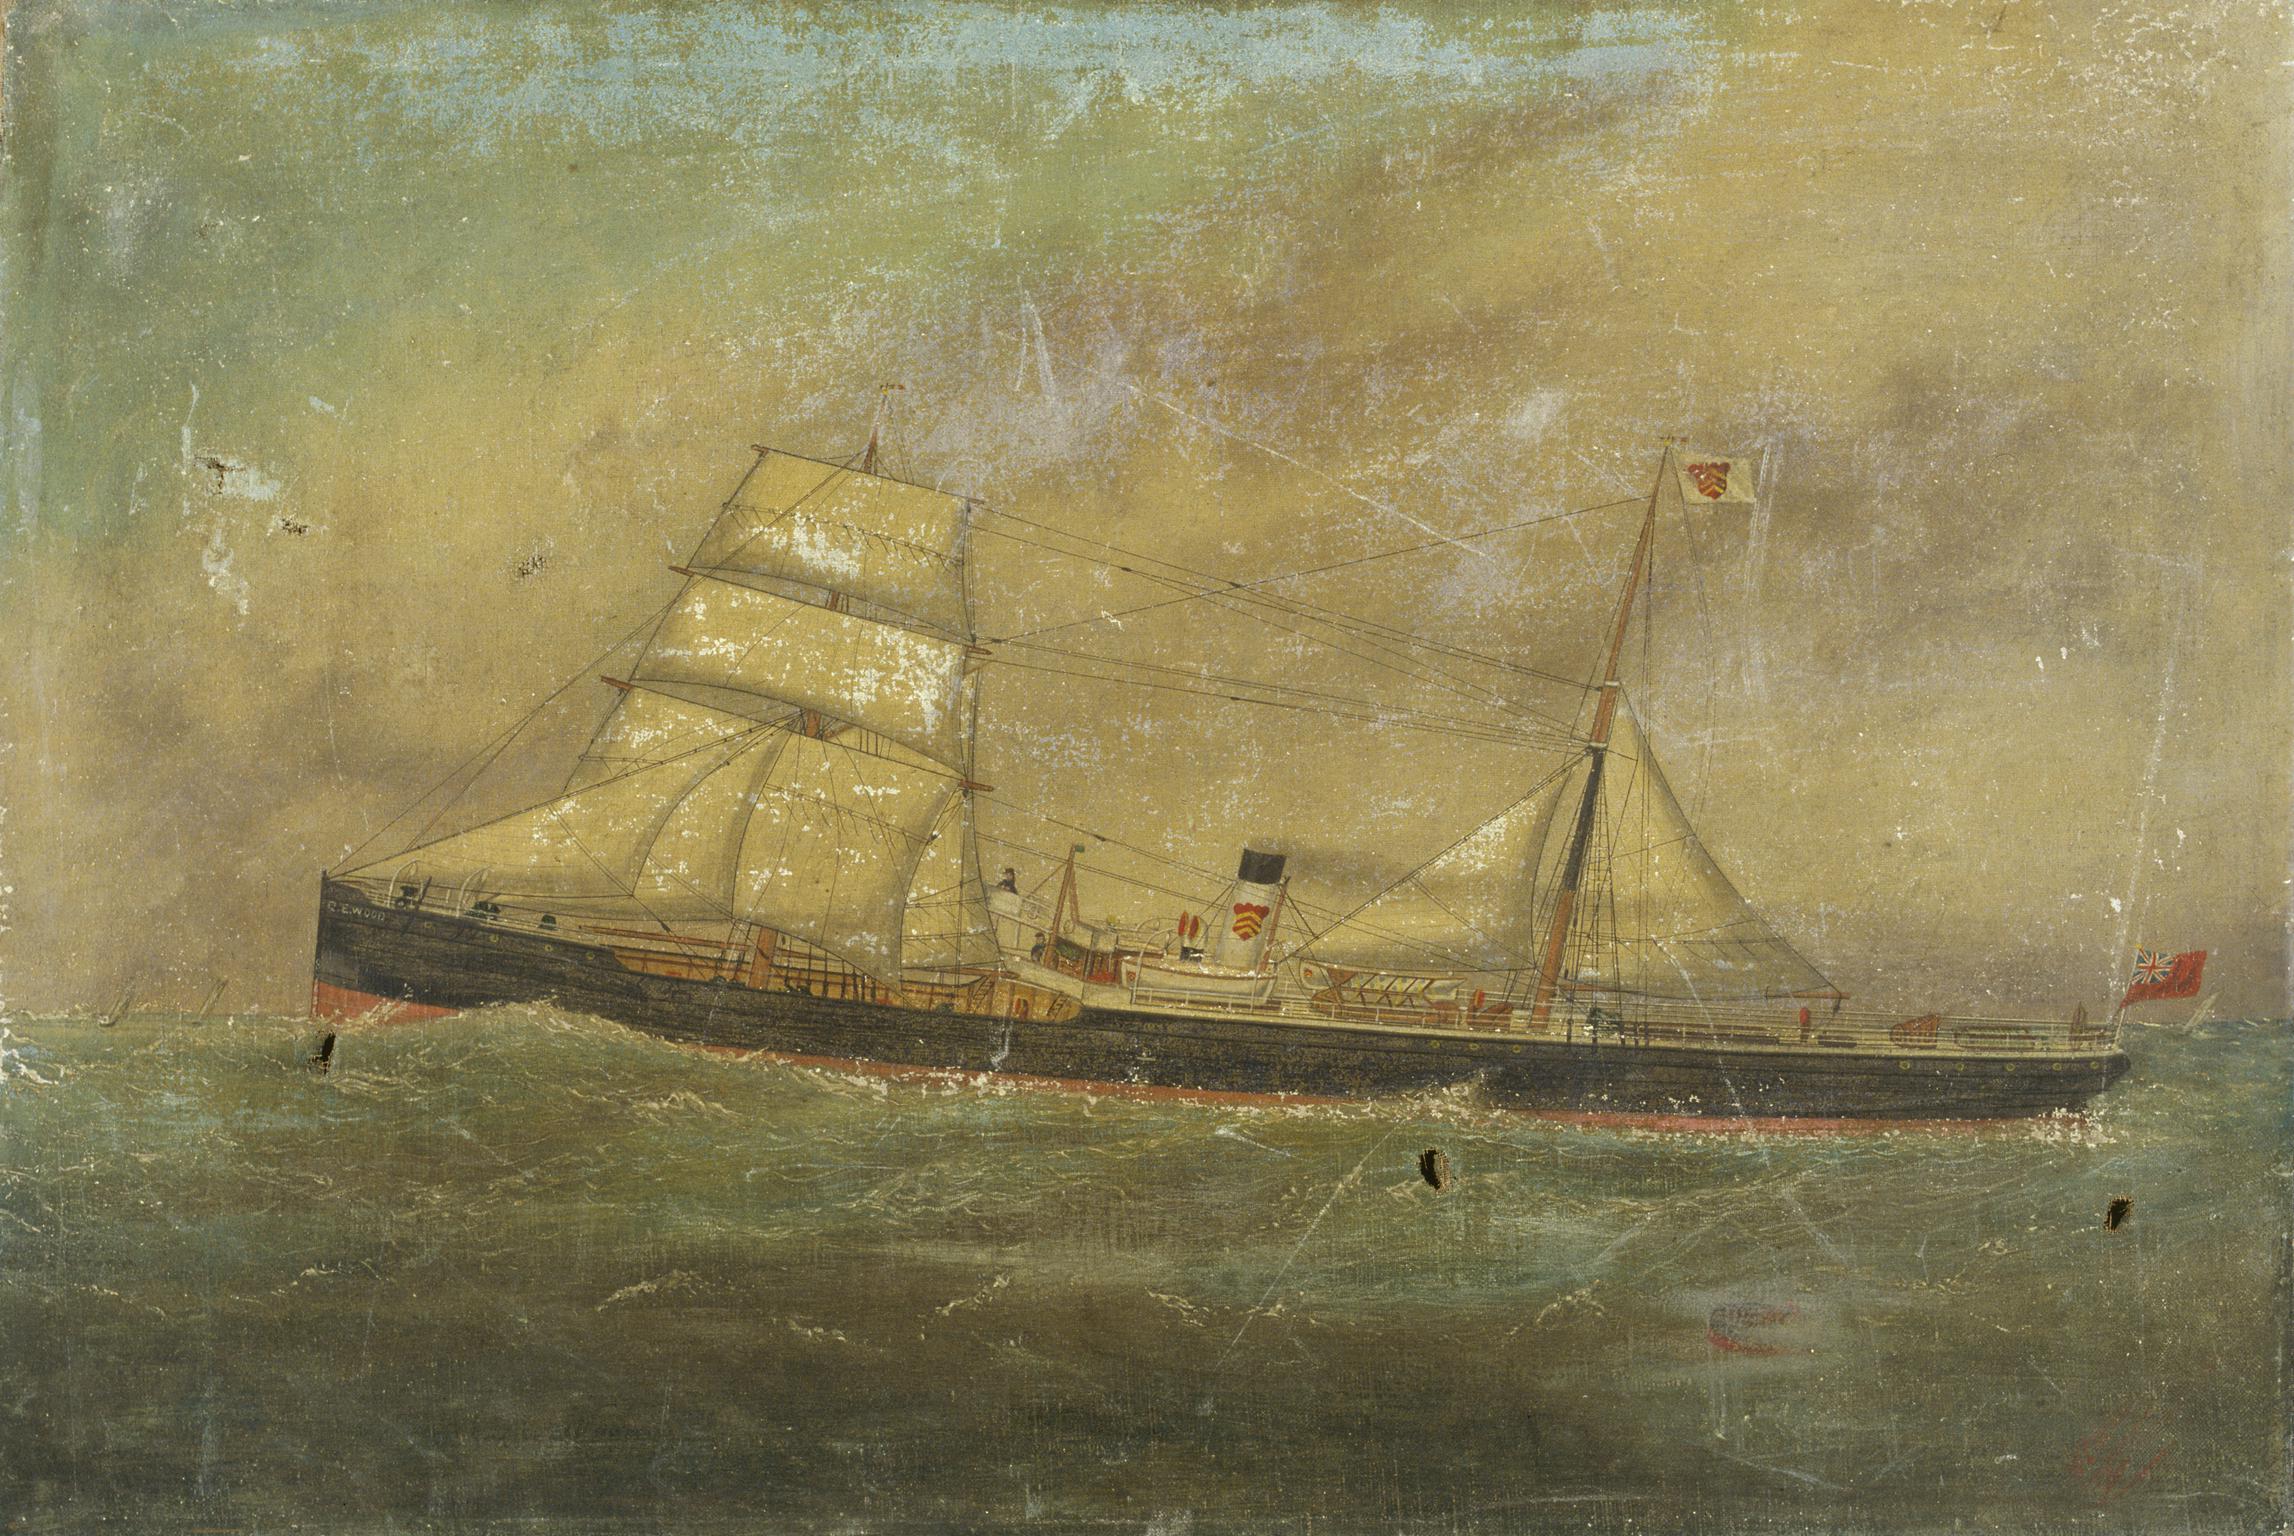 S.S. C.E. WOOD (painting)